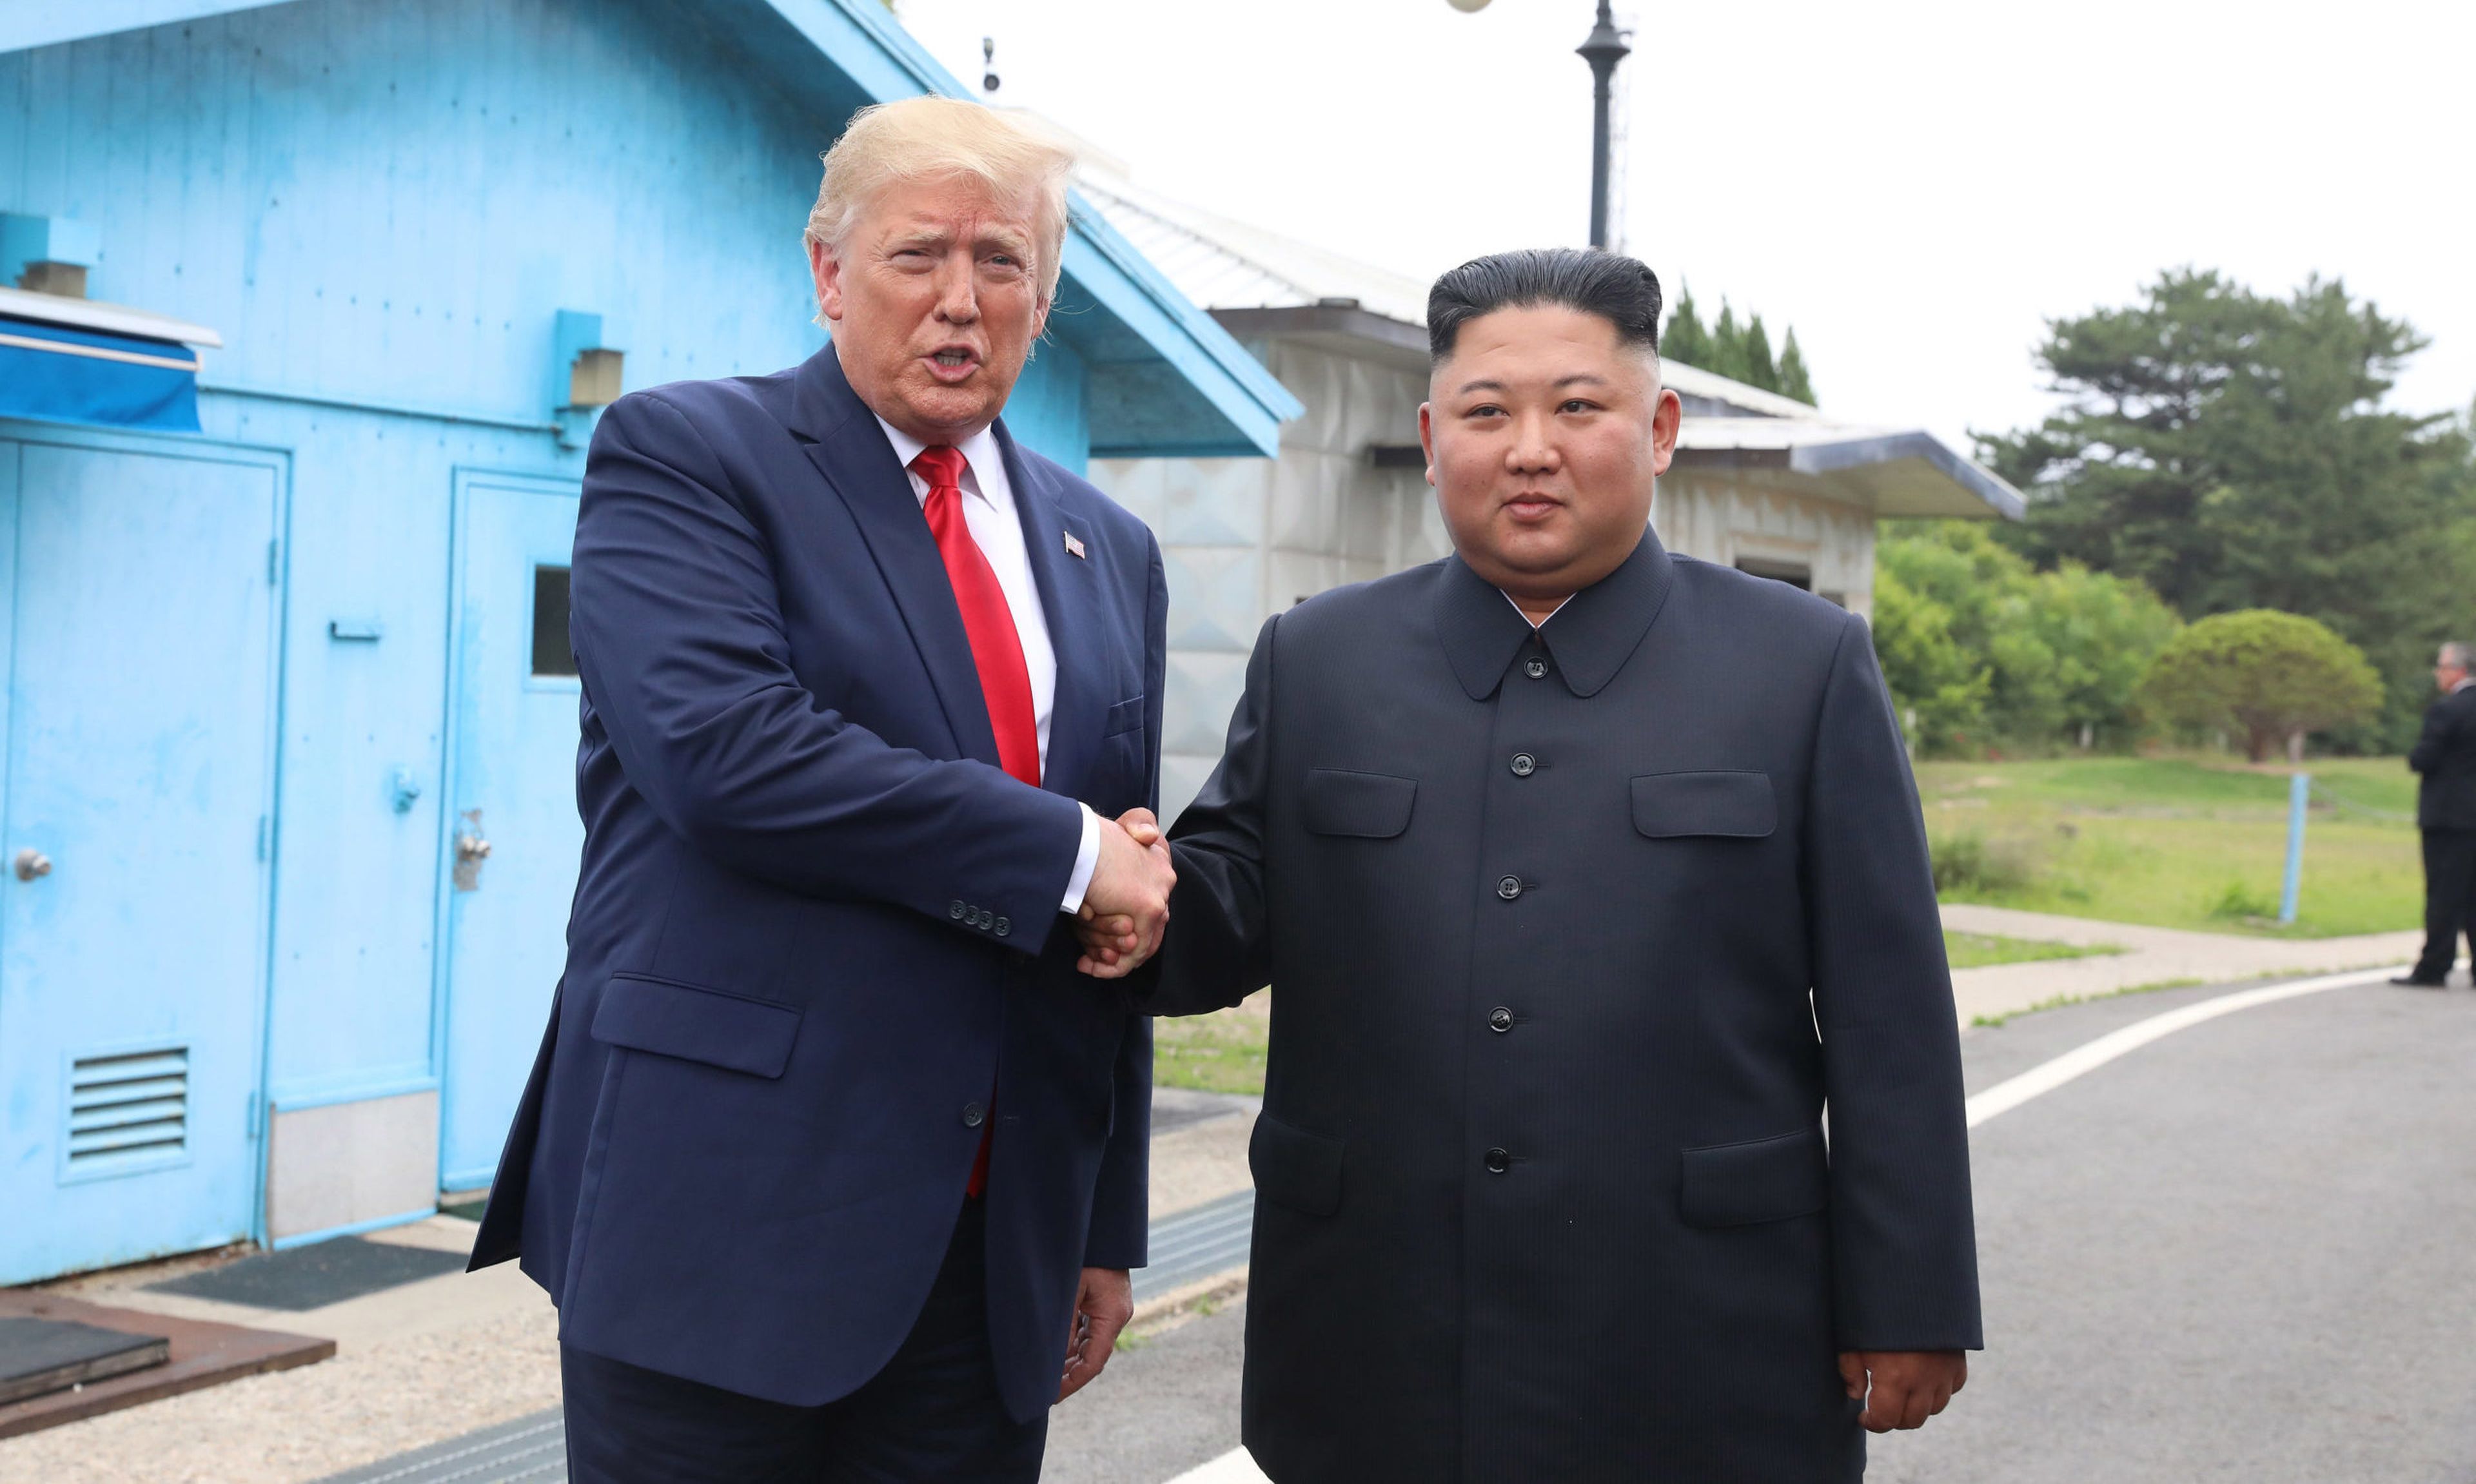 PANMUNJOM, SOUTH KOREA &#8211; JUNE 30 (SOUTH KOREA OUT): A handout photo provided by Dong-A Ilbo of North Korean leader Kim Jong Un and U.S. President Donald Trump inside the demilitarized zone (DMZ) separating the South and North Korea on June 30, 2019 in Panmunjom, South Korea. U.S. President Donald Trump and North Korean leader Kim Jong-un brie...